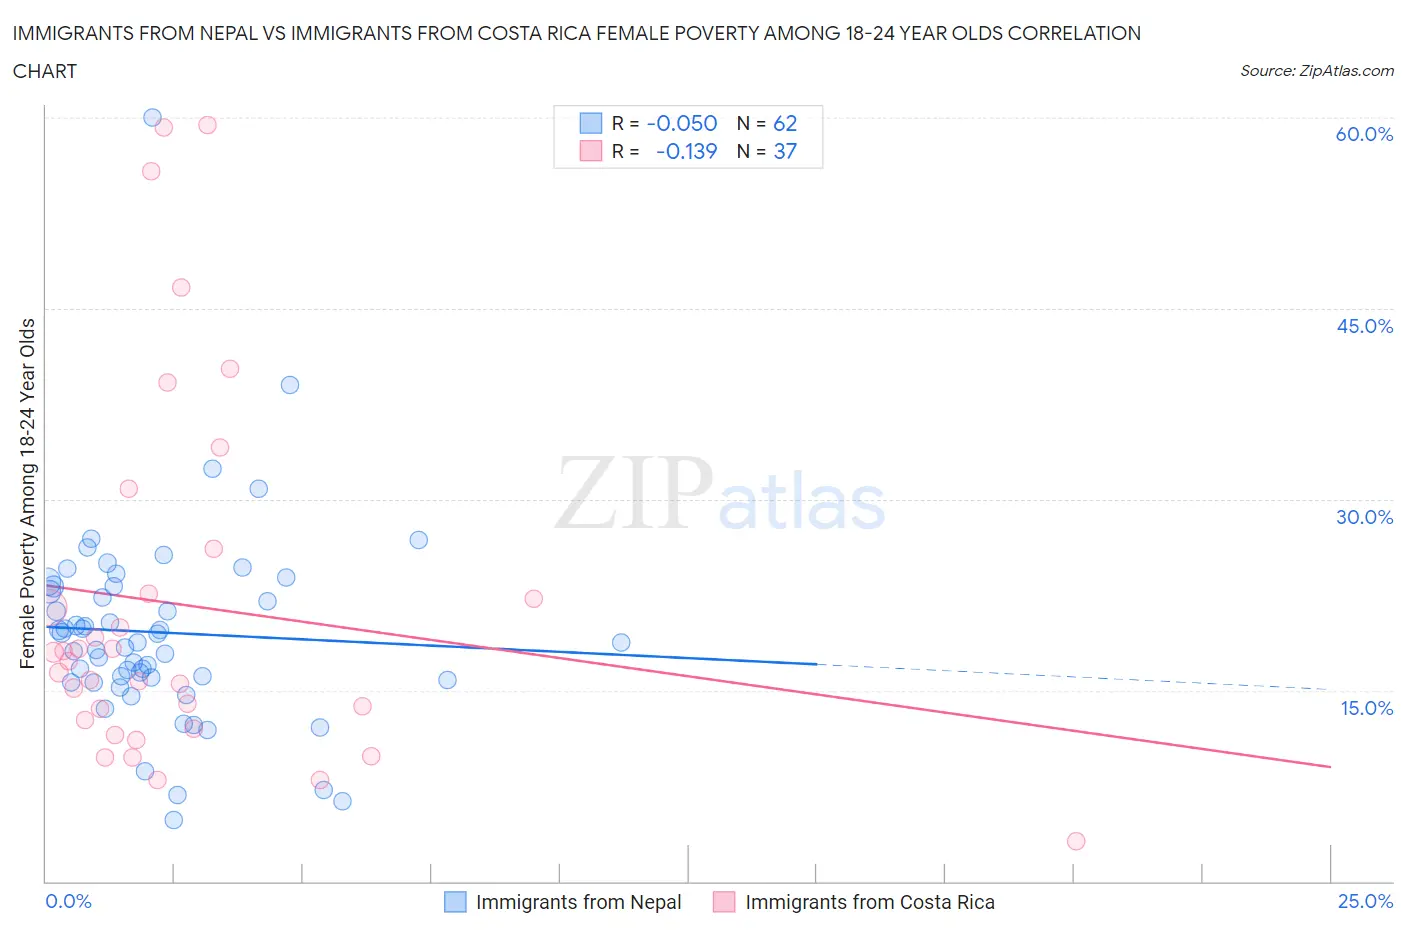 Immigrants from Nepal vs Immigrants from Costa Rica Female Poverty Among 18-24 Year Olds